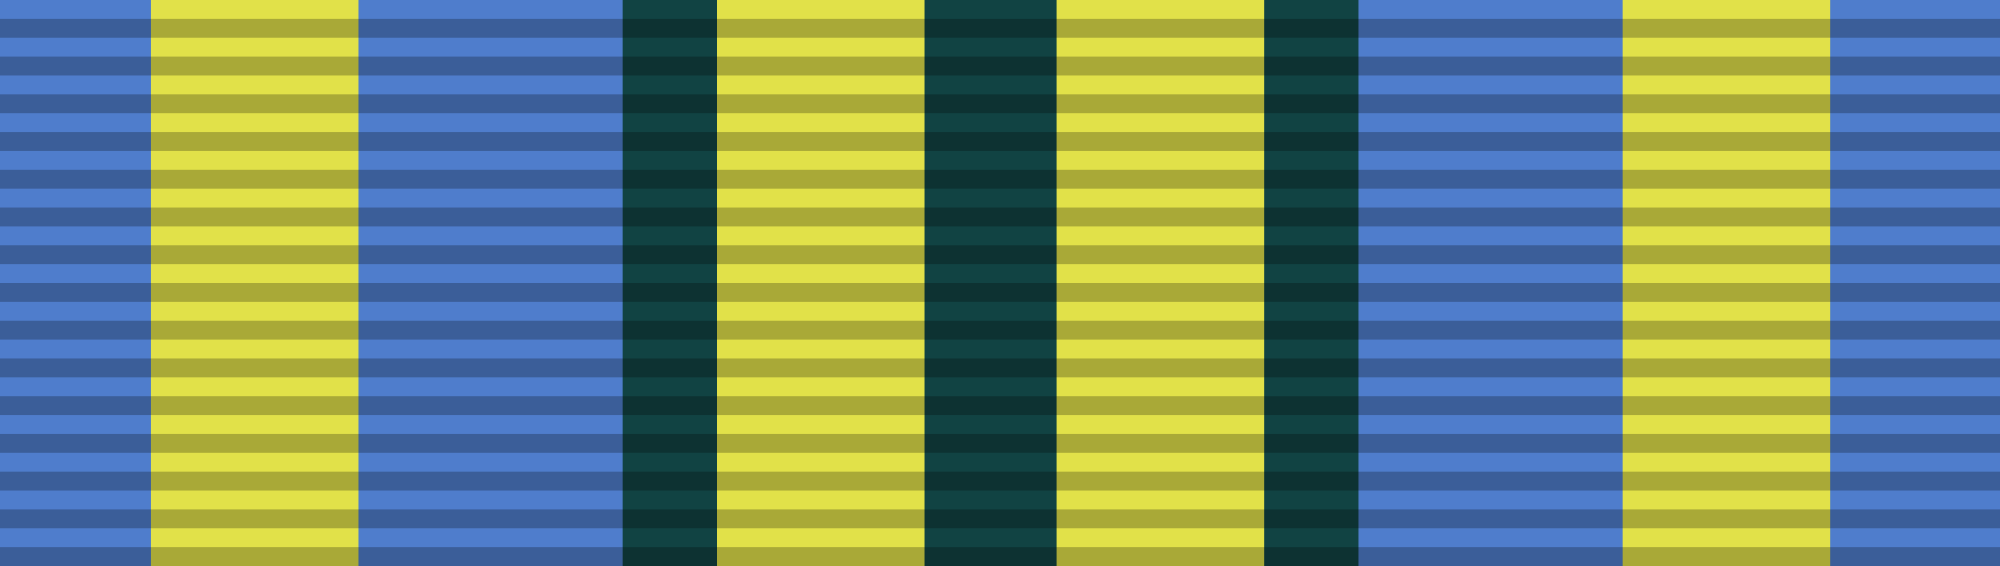 2000px-outstanding_volunteer_service_ribbon-svg